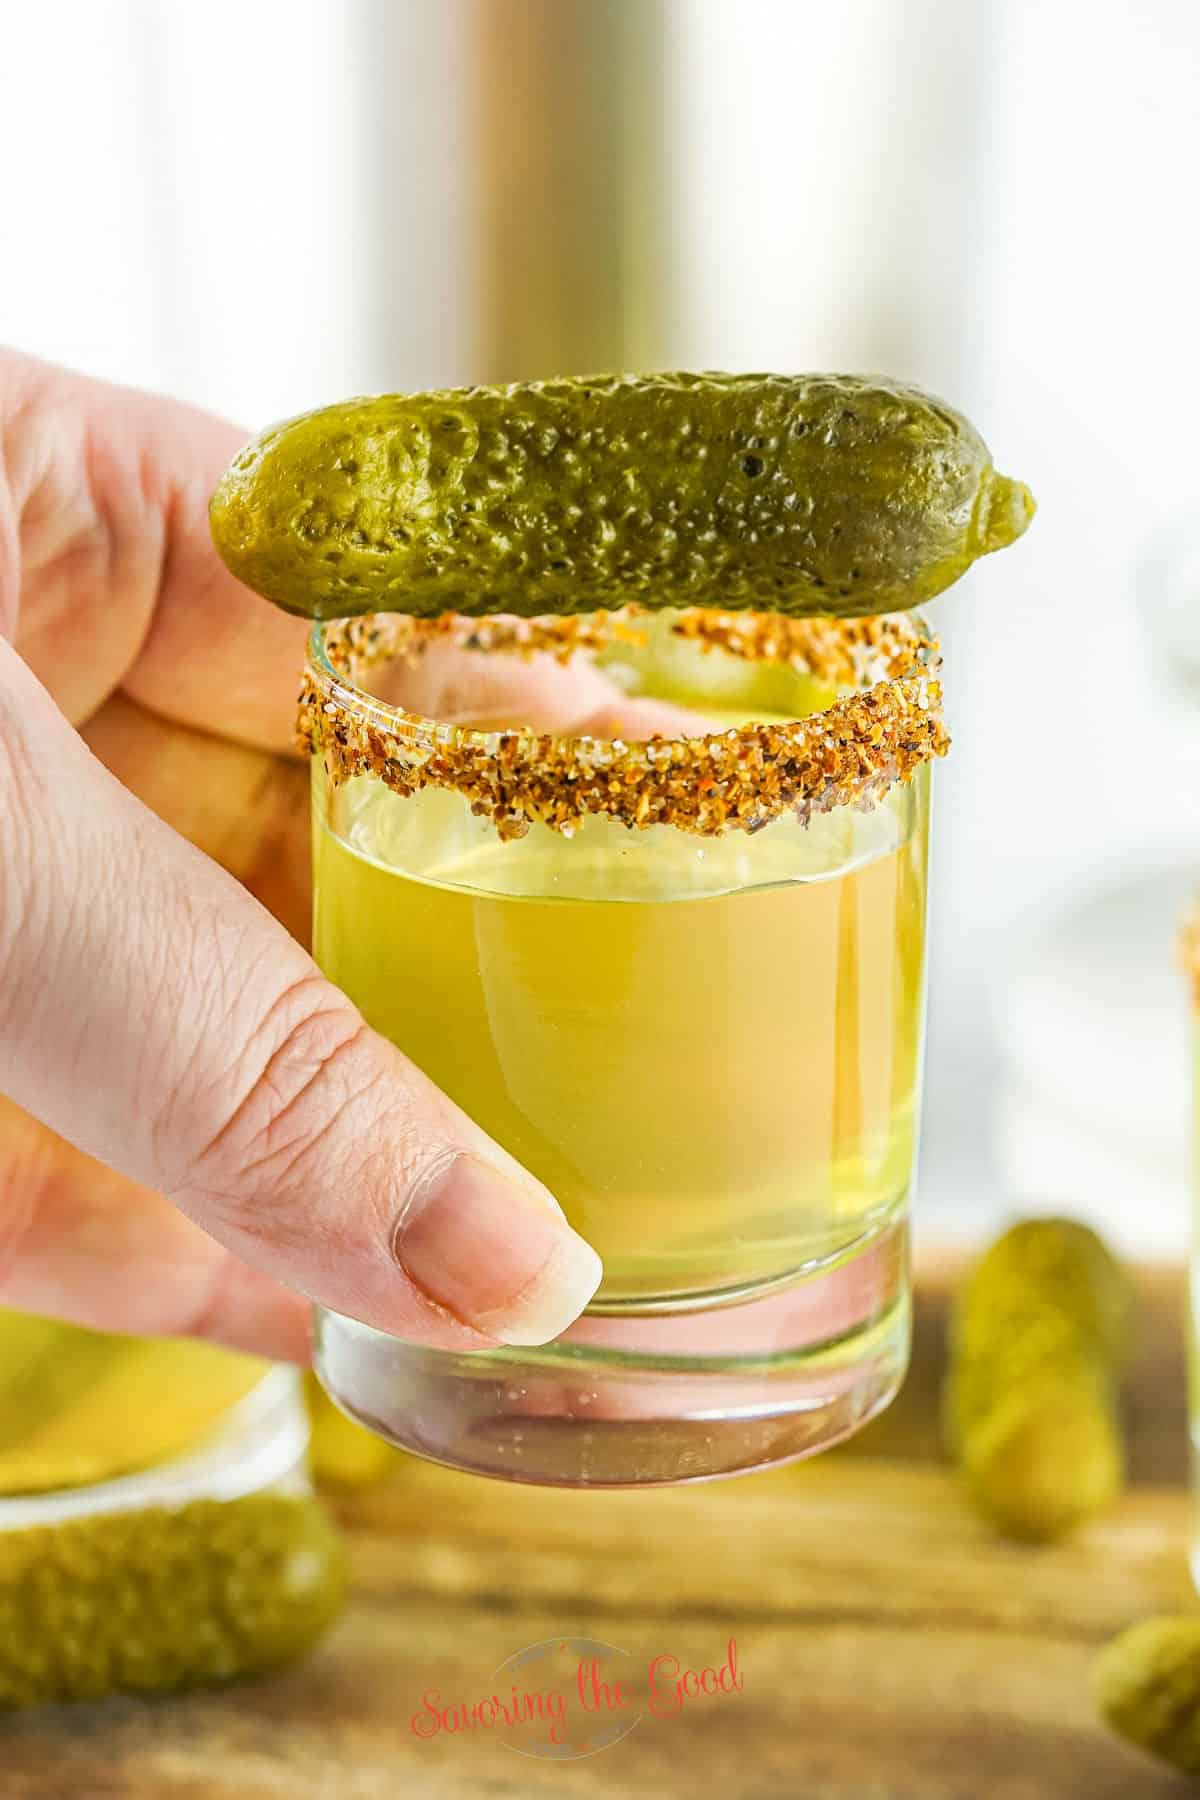 Pickle shot with tajhin rim and gerkin garnish in a clear glass being held by a hand.